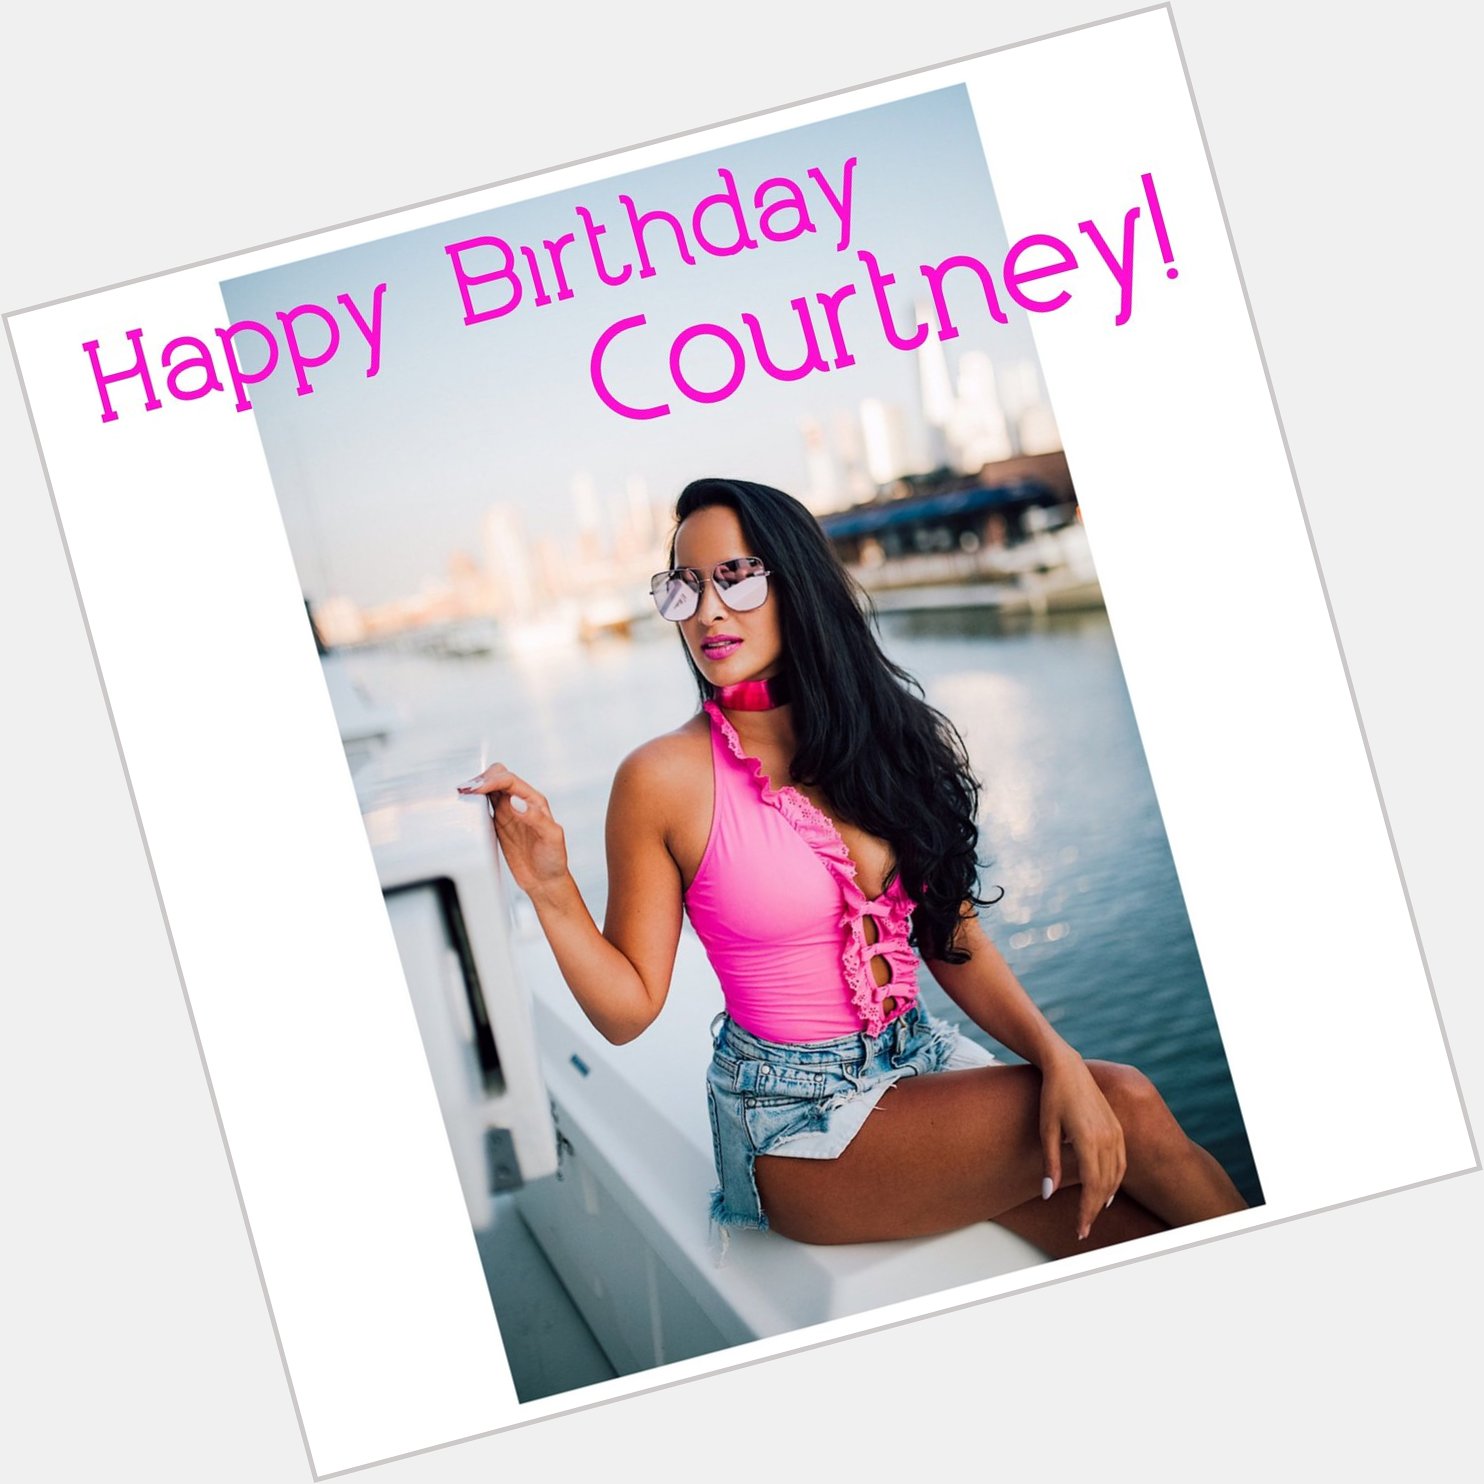 Happy birthday Courtney! Hope your day is as fabulous as you are! 